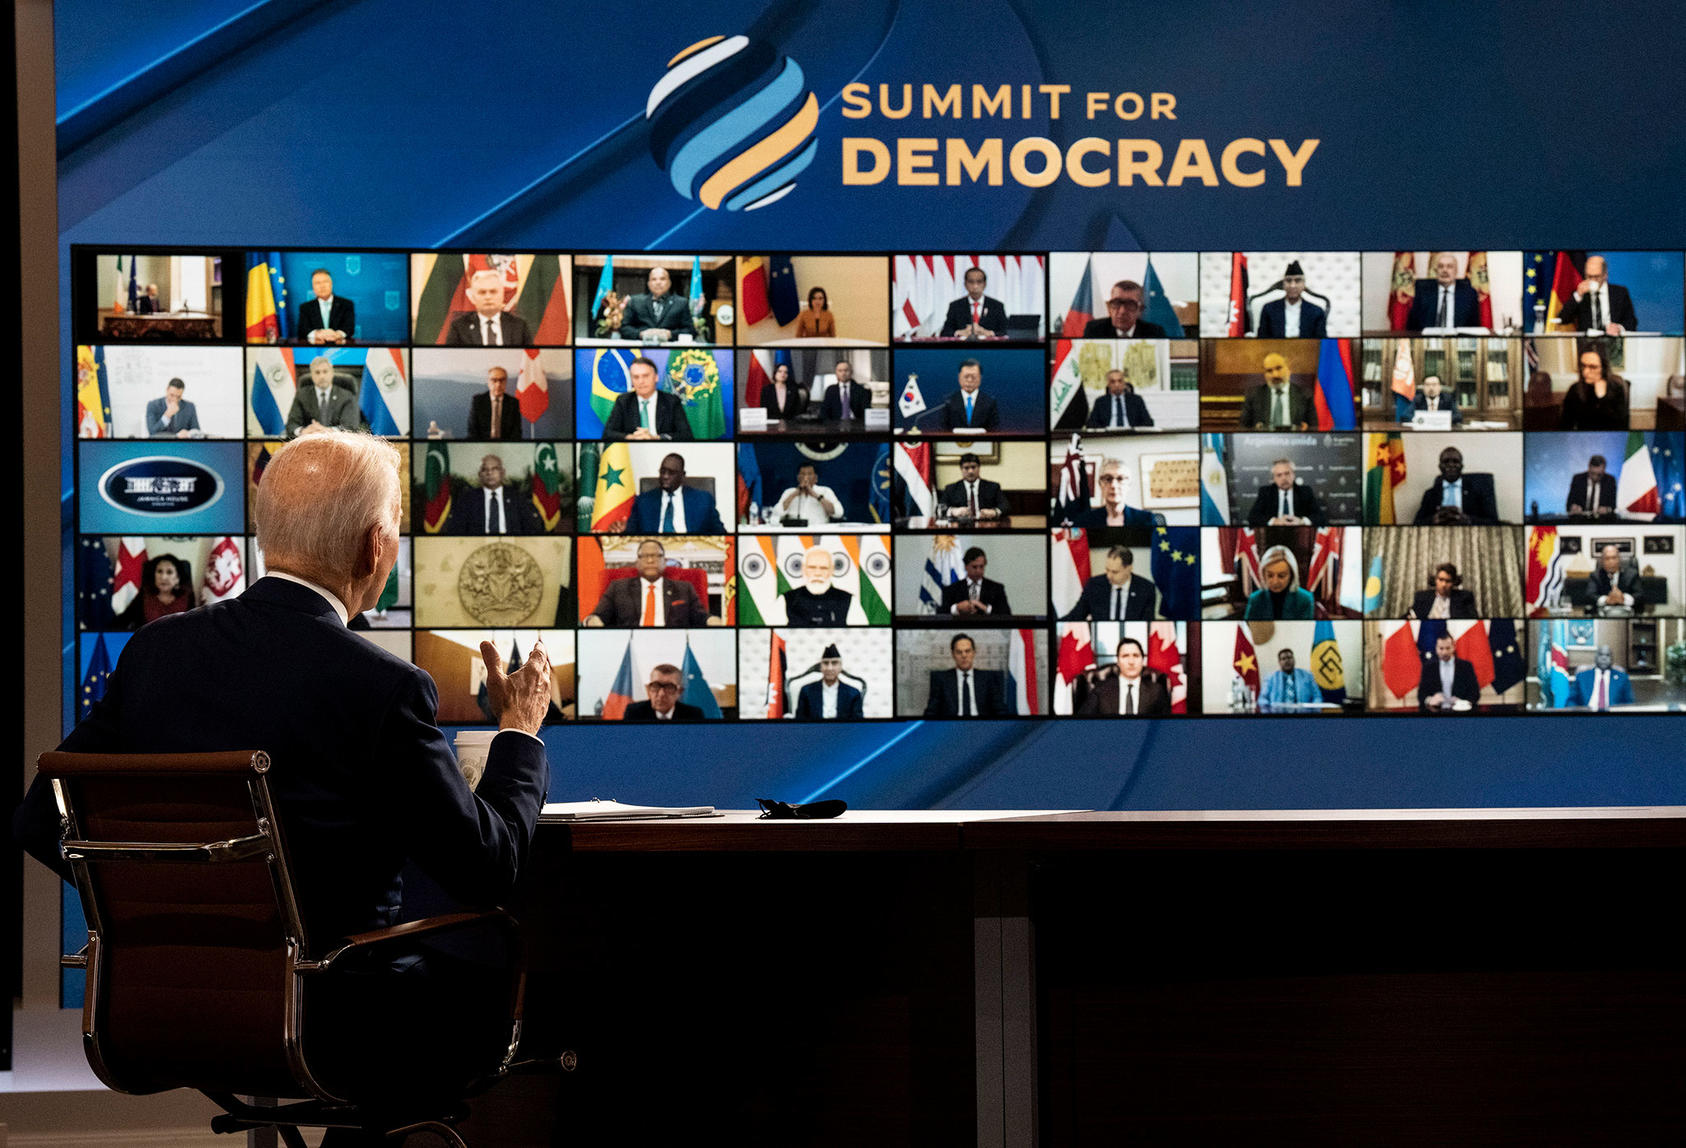 President Joe Biden delivers opening remarks at the virtual Summit for Democracy, at the White House in Washington on Thursday Dec. 9, 2021. (Doug Mills/The New York Times)